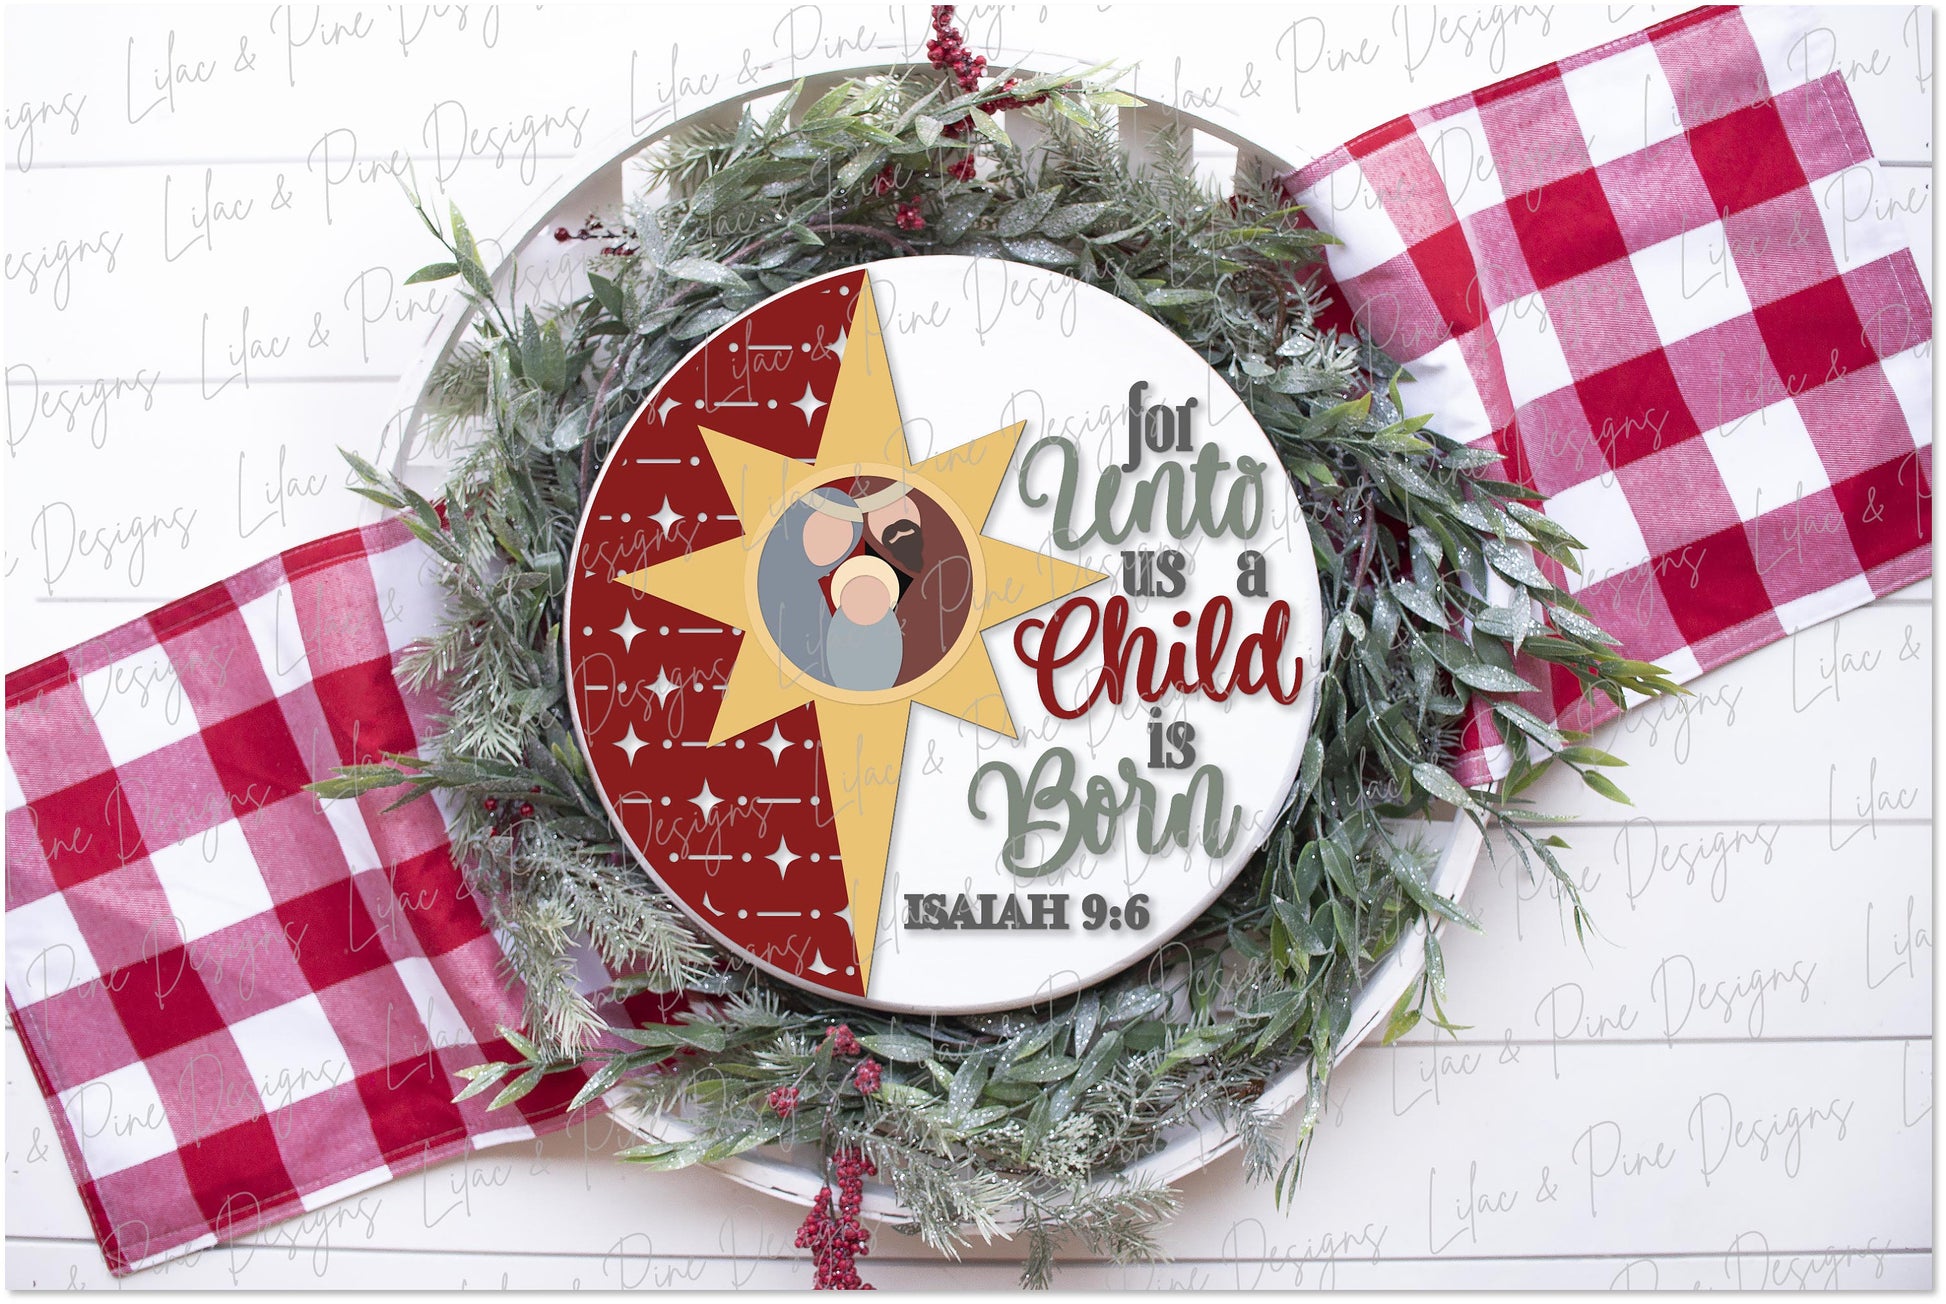 Unto us a Child is Born SVG, Christmas welcome sign SVG, Christmas door hanger SVG, Religious Christmas sign, Glowforge Svg, laser cut file